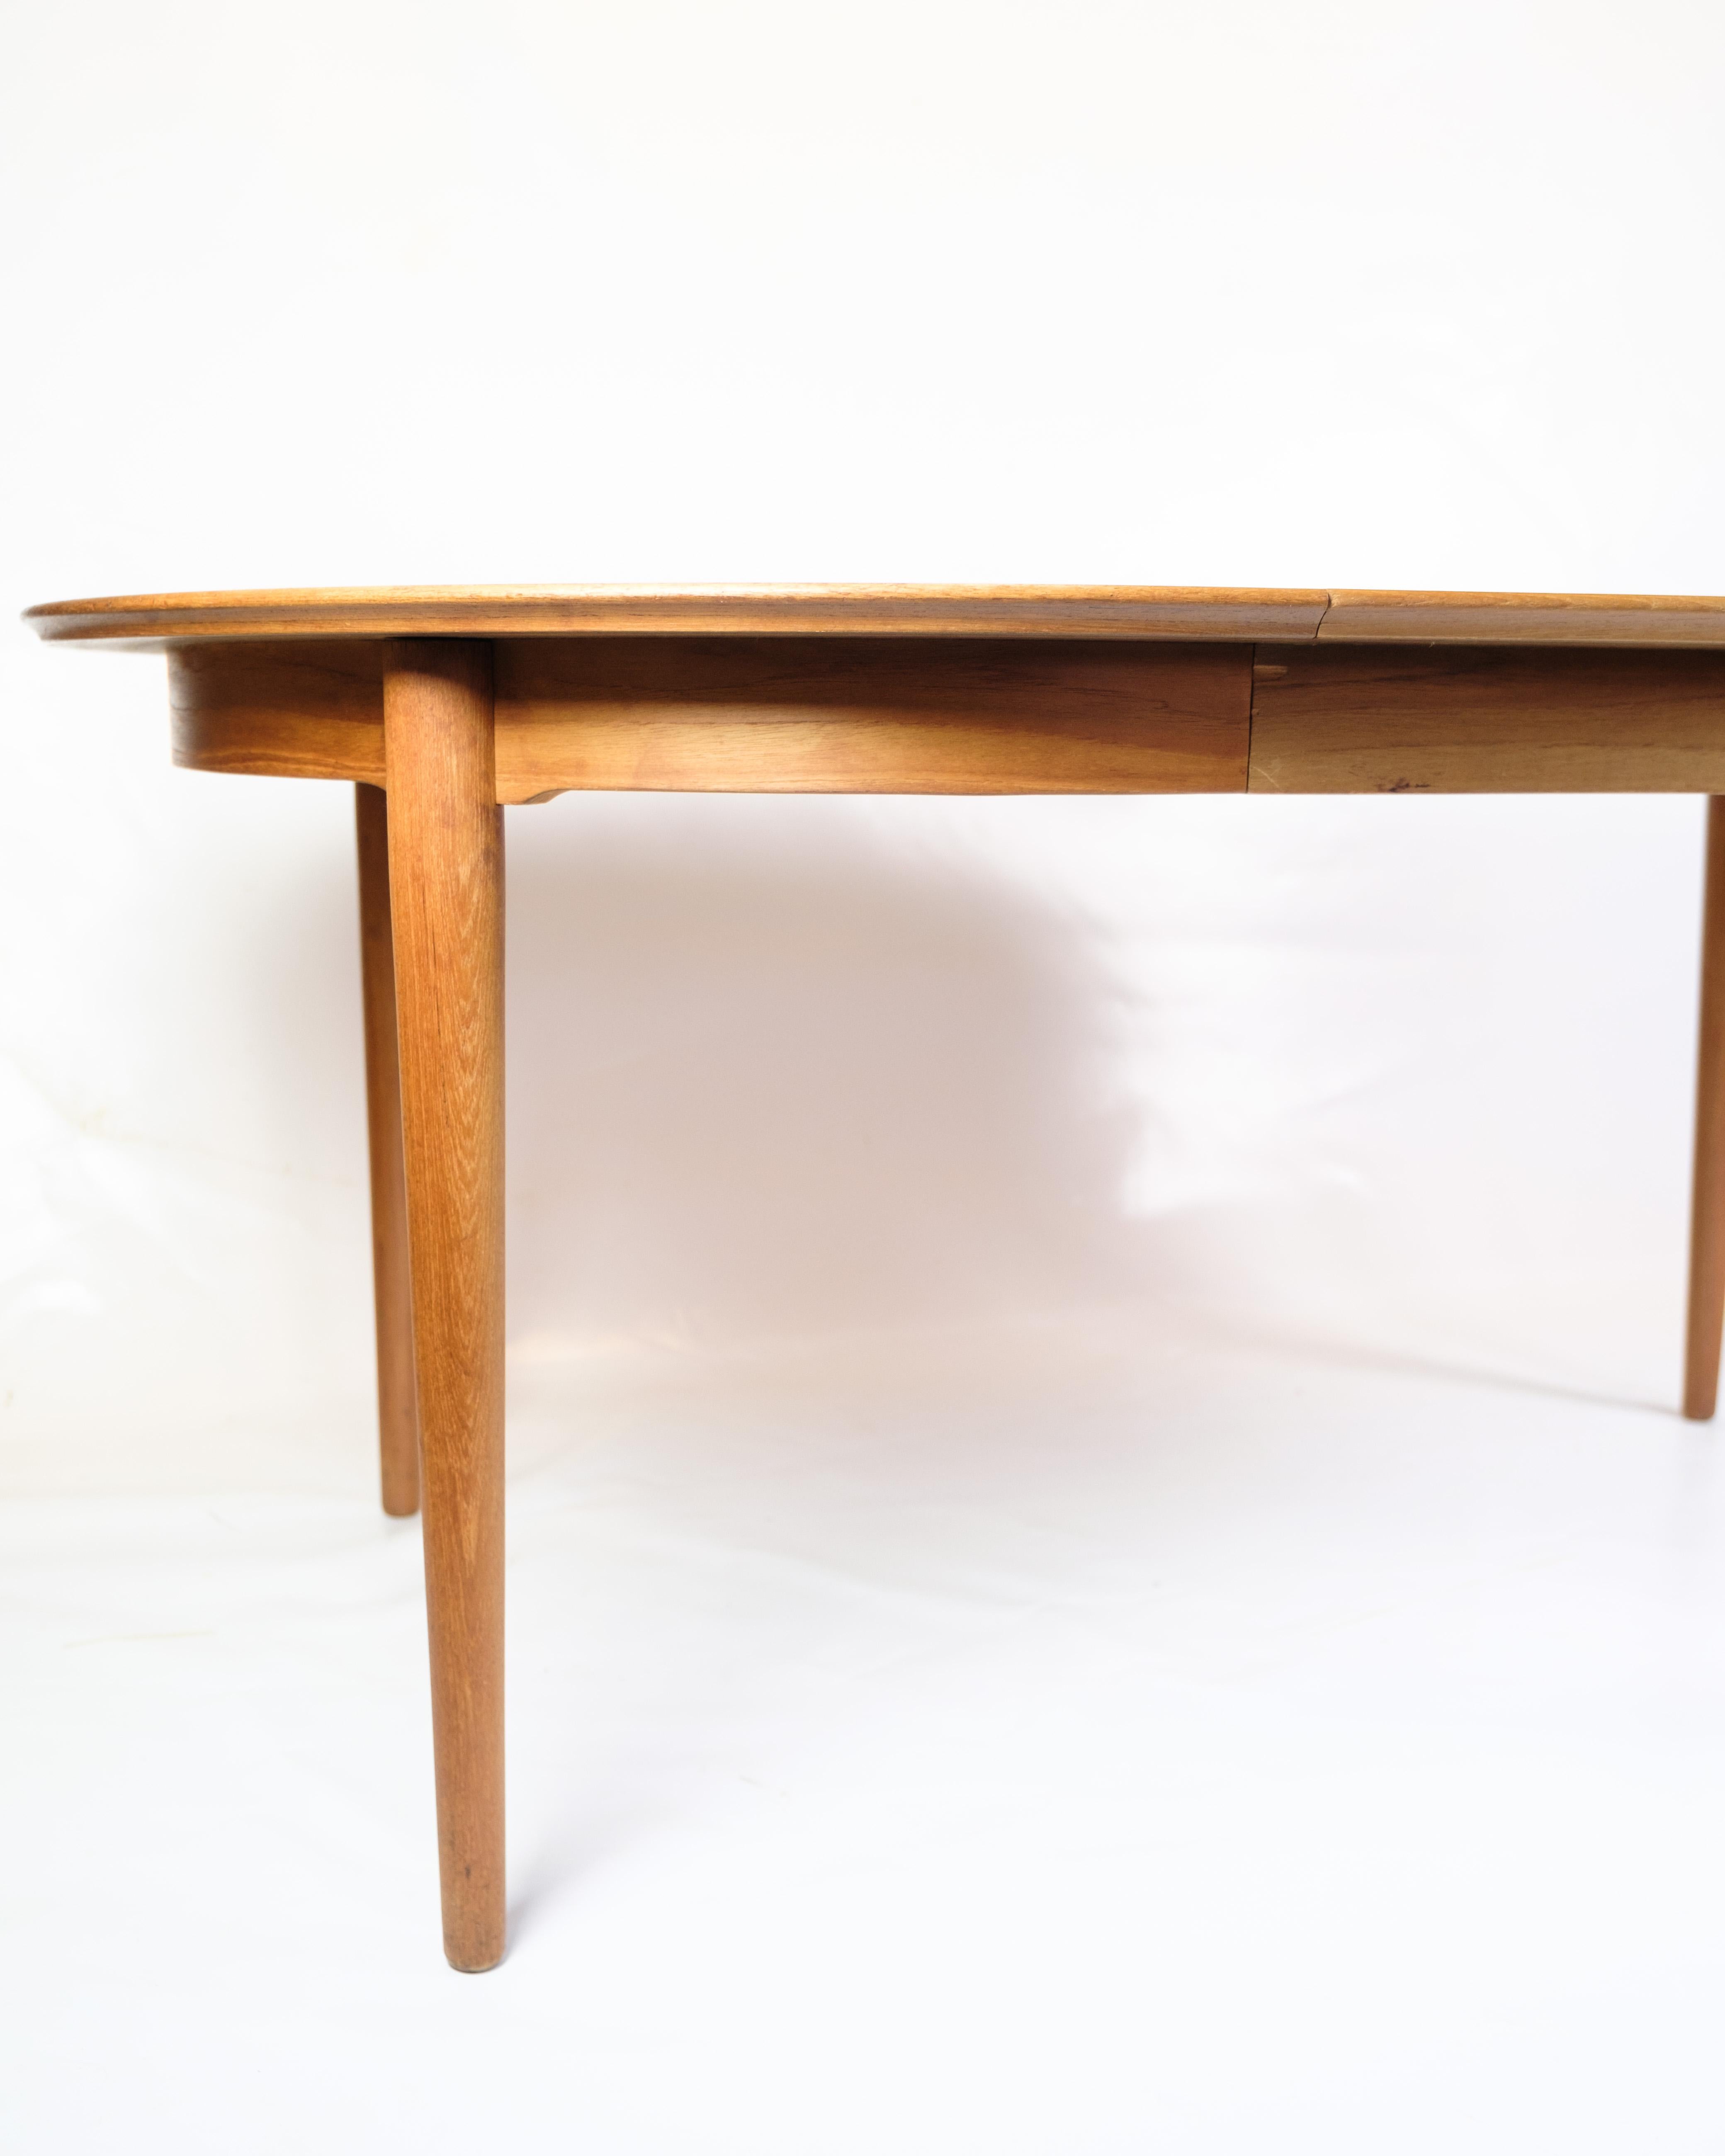 Dining Room Table Made In Teak With Extensions By Arne Vodder From 1960s For Sale 4